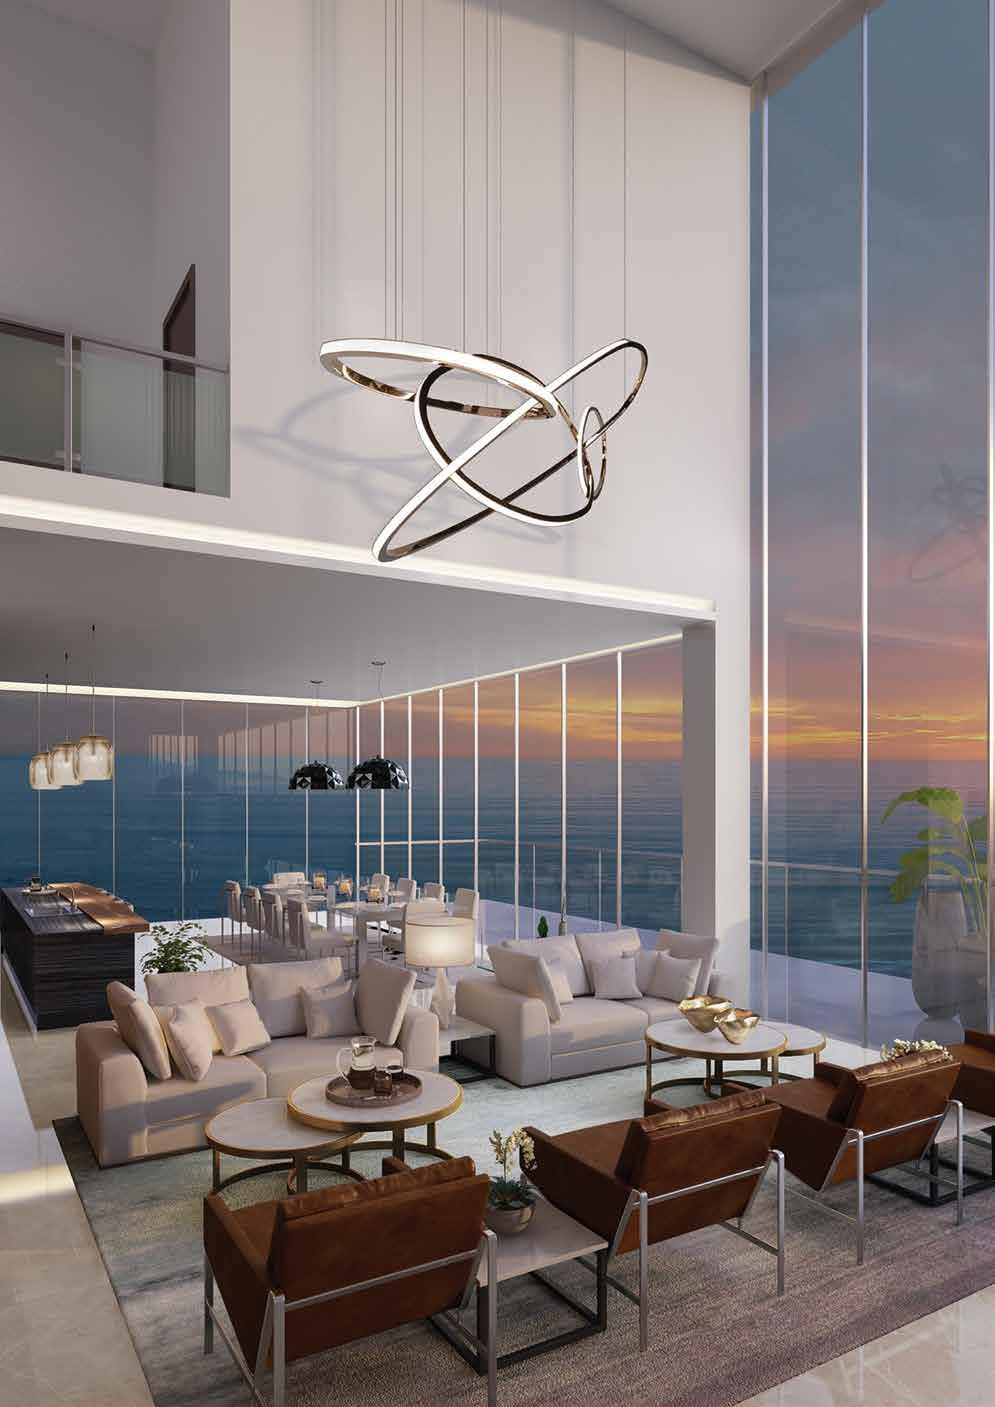 CREATED FOR HIGHER LIVING Living at 1/JBR is a luxurious experience that caters to all senses.